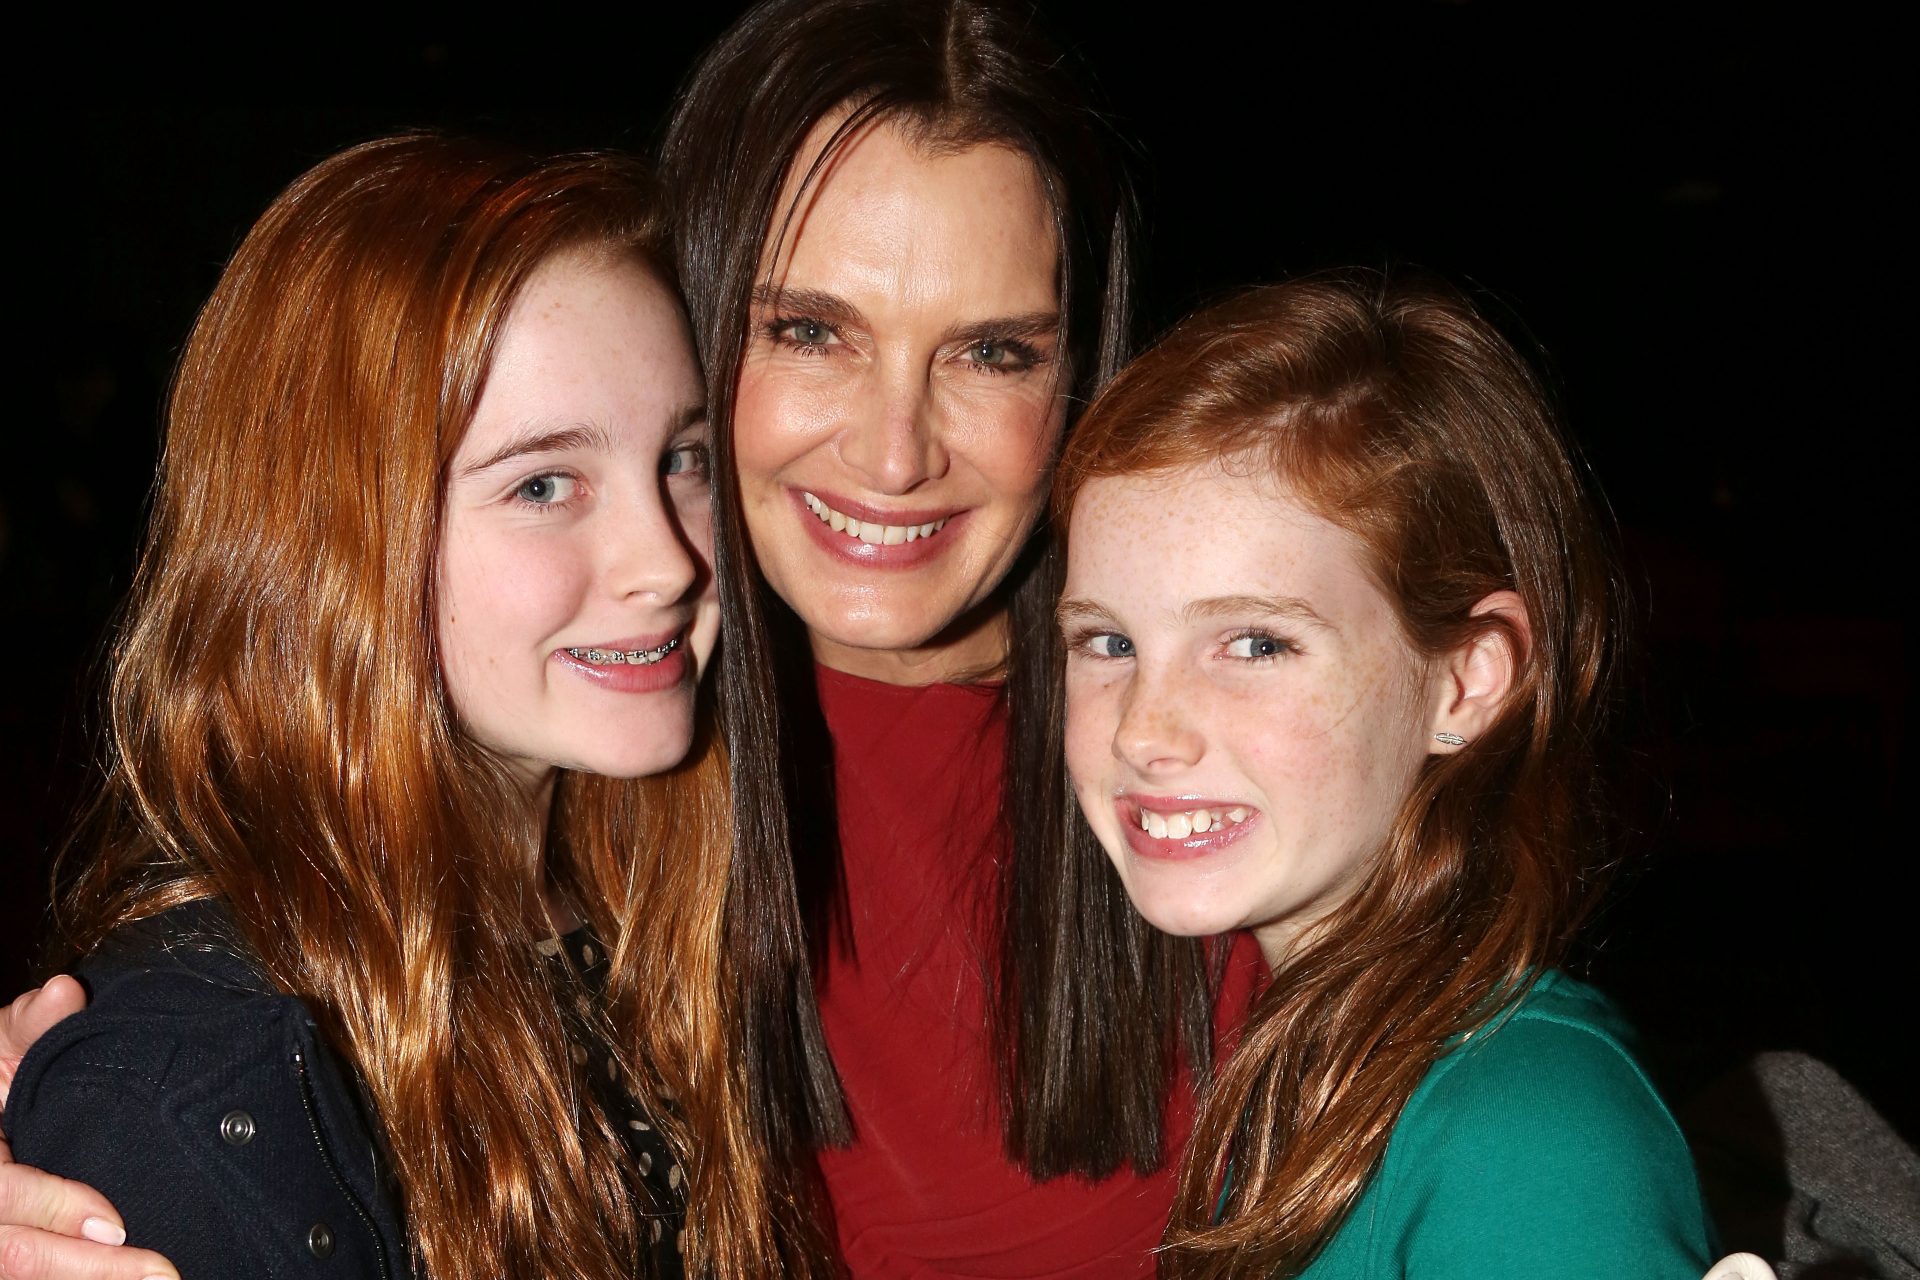 The beautiful daughters of Brooke Shields